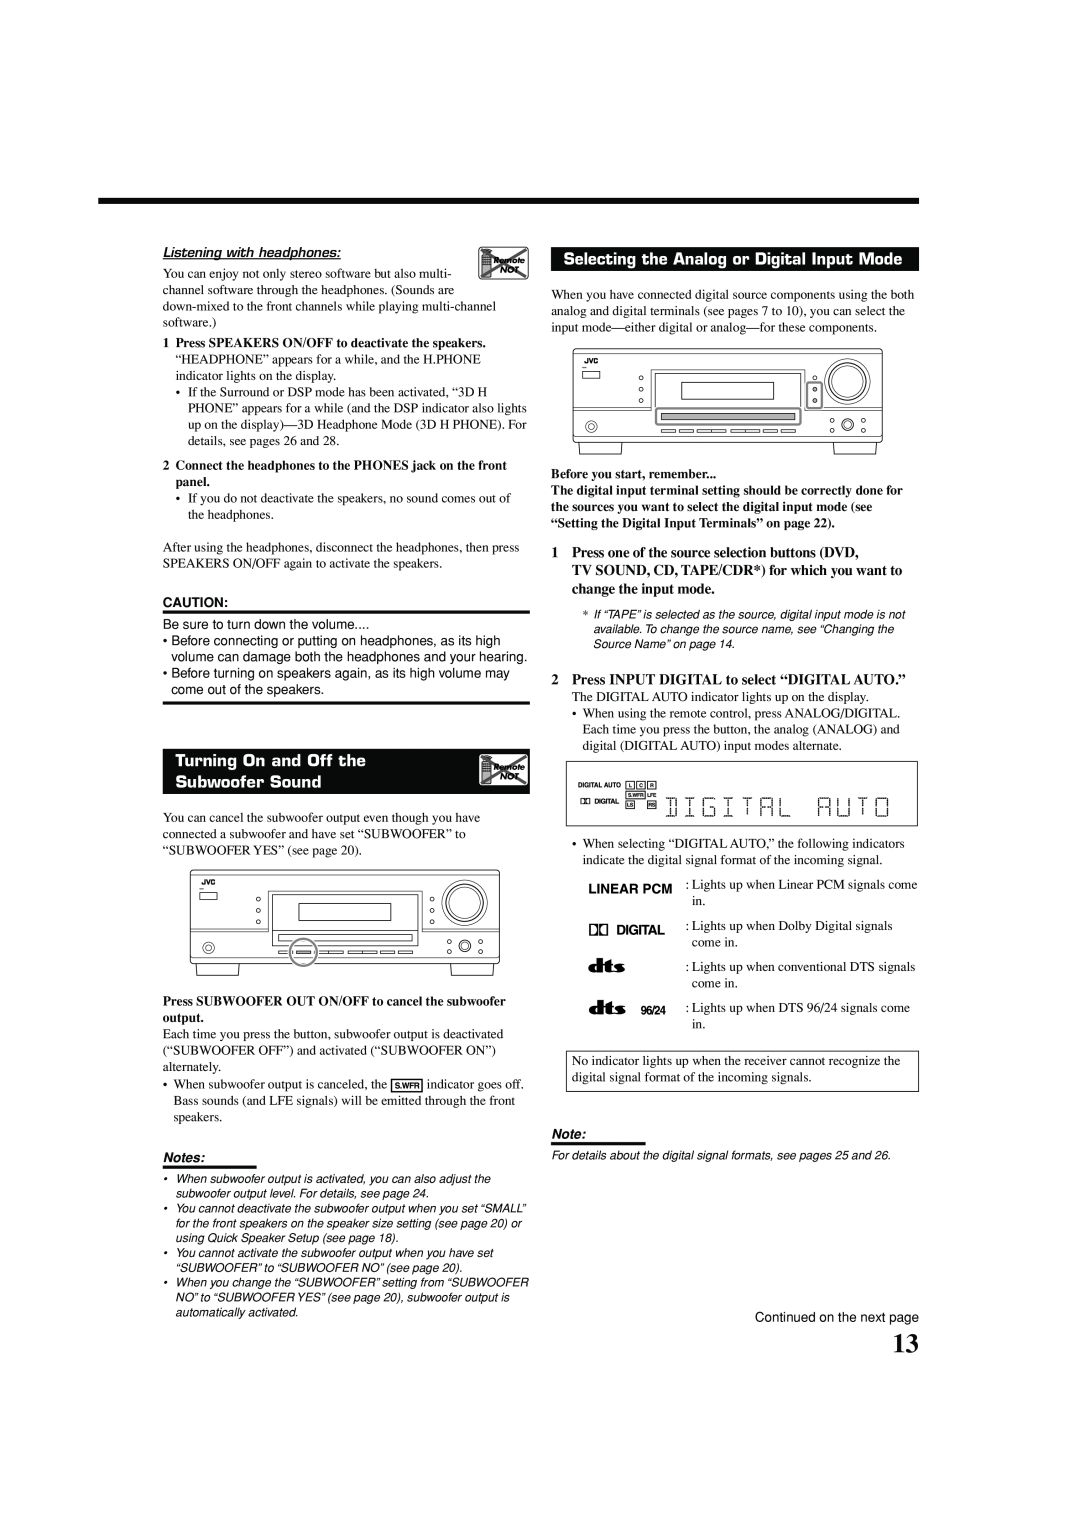 JVC LVT1140-007A, 0404RYMMDWJEIN manual Turning On and Off the, Subwoofer Sound, Selecting the Analog or Digital Input Mode 